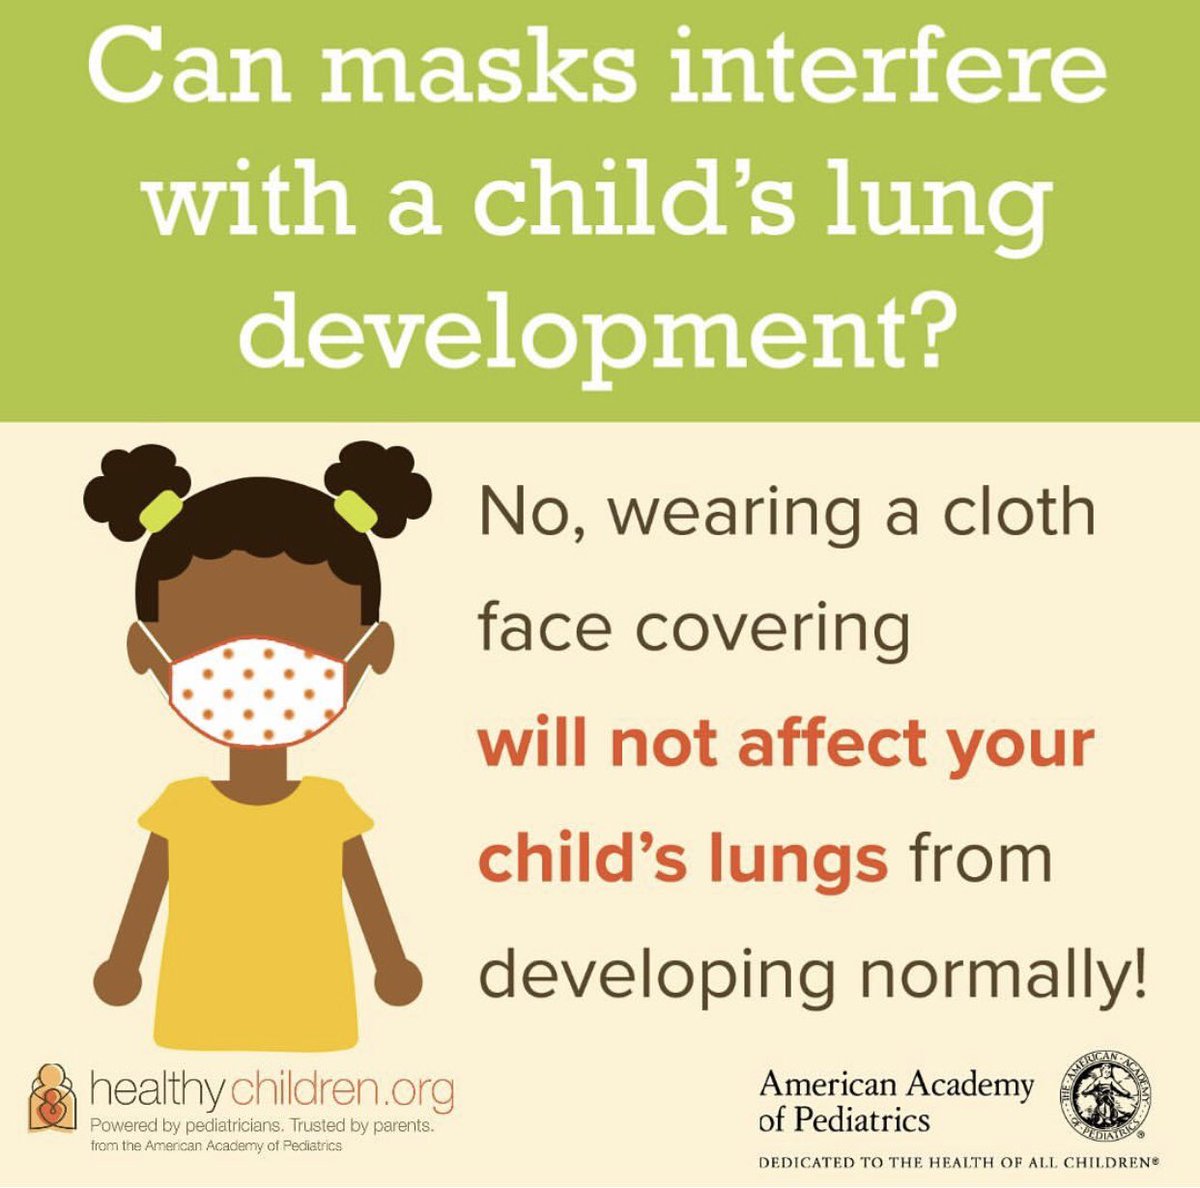 4/5 -  #Pearl4Parents - Wearing a mask does not adversely affect lung development... @AAPCA2  @CMAdocs  @healthychildren  @AmerAcadPeds  @LAPedSoc  @PedUrgentCare  @physicianswkly  @somedocs  #Masks  #COVID19  #children  #MaskUpAmerica